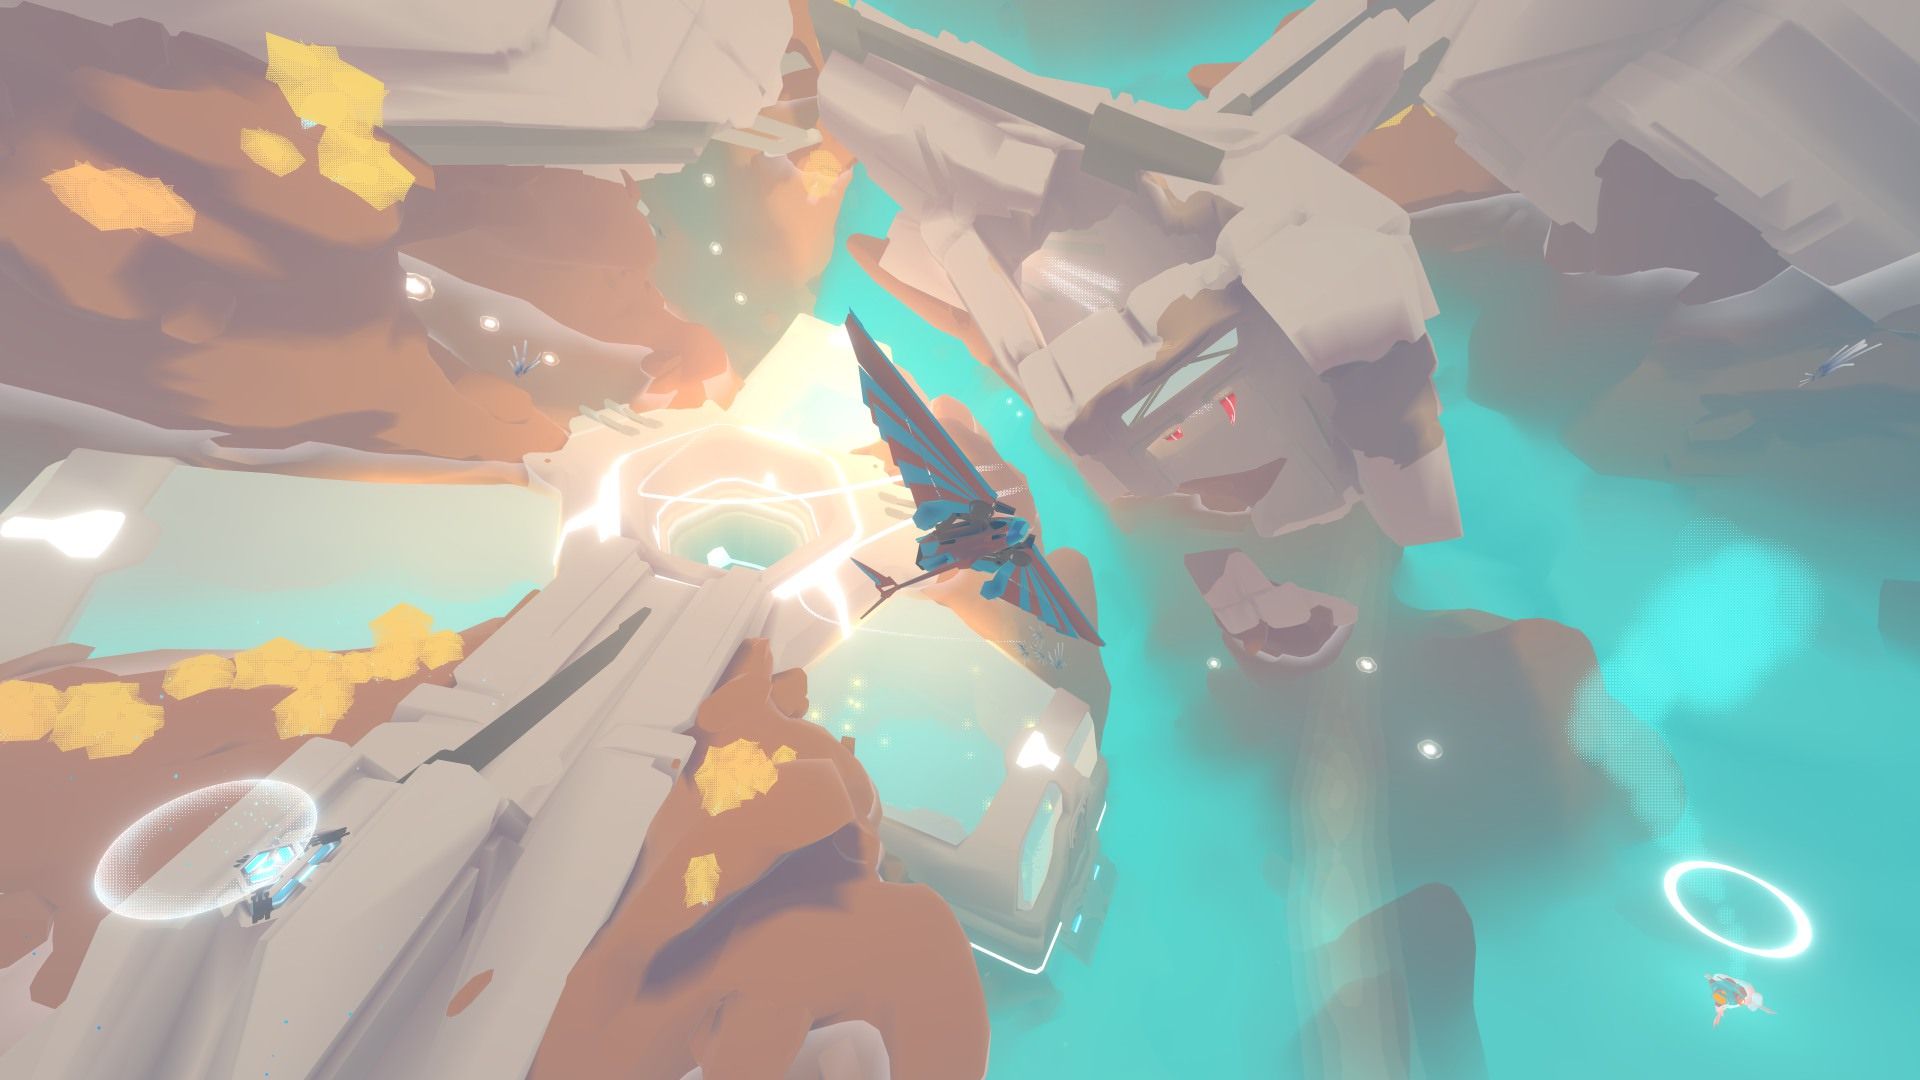 Explore A Universe Of Inside Out Planets In InnerSpace